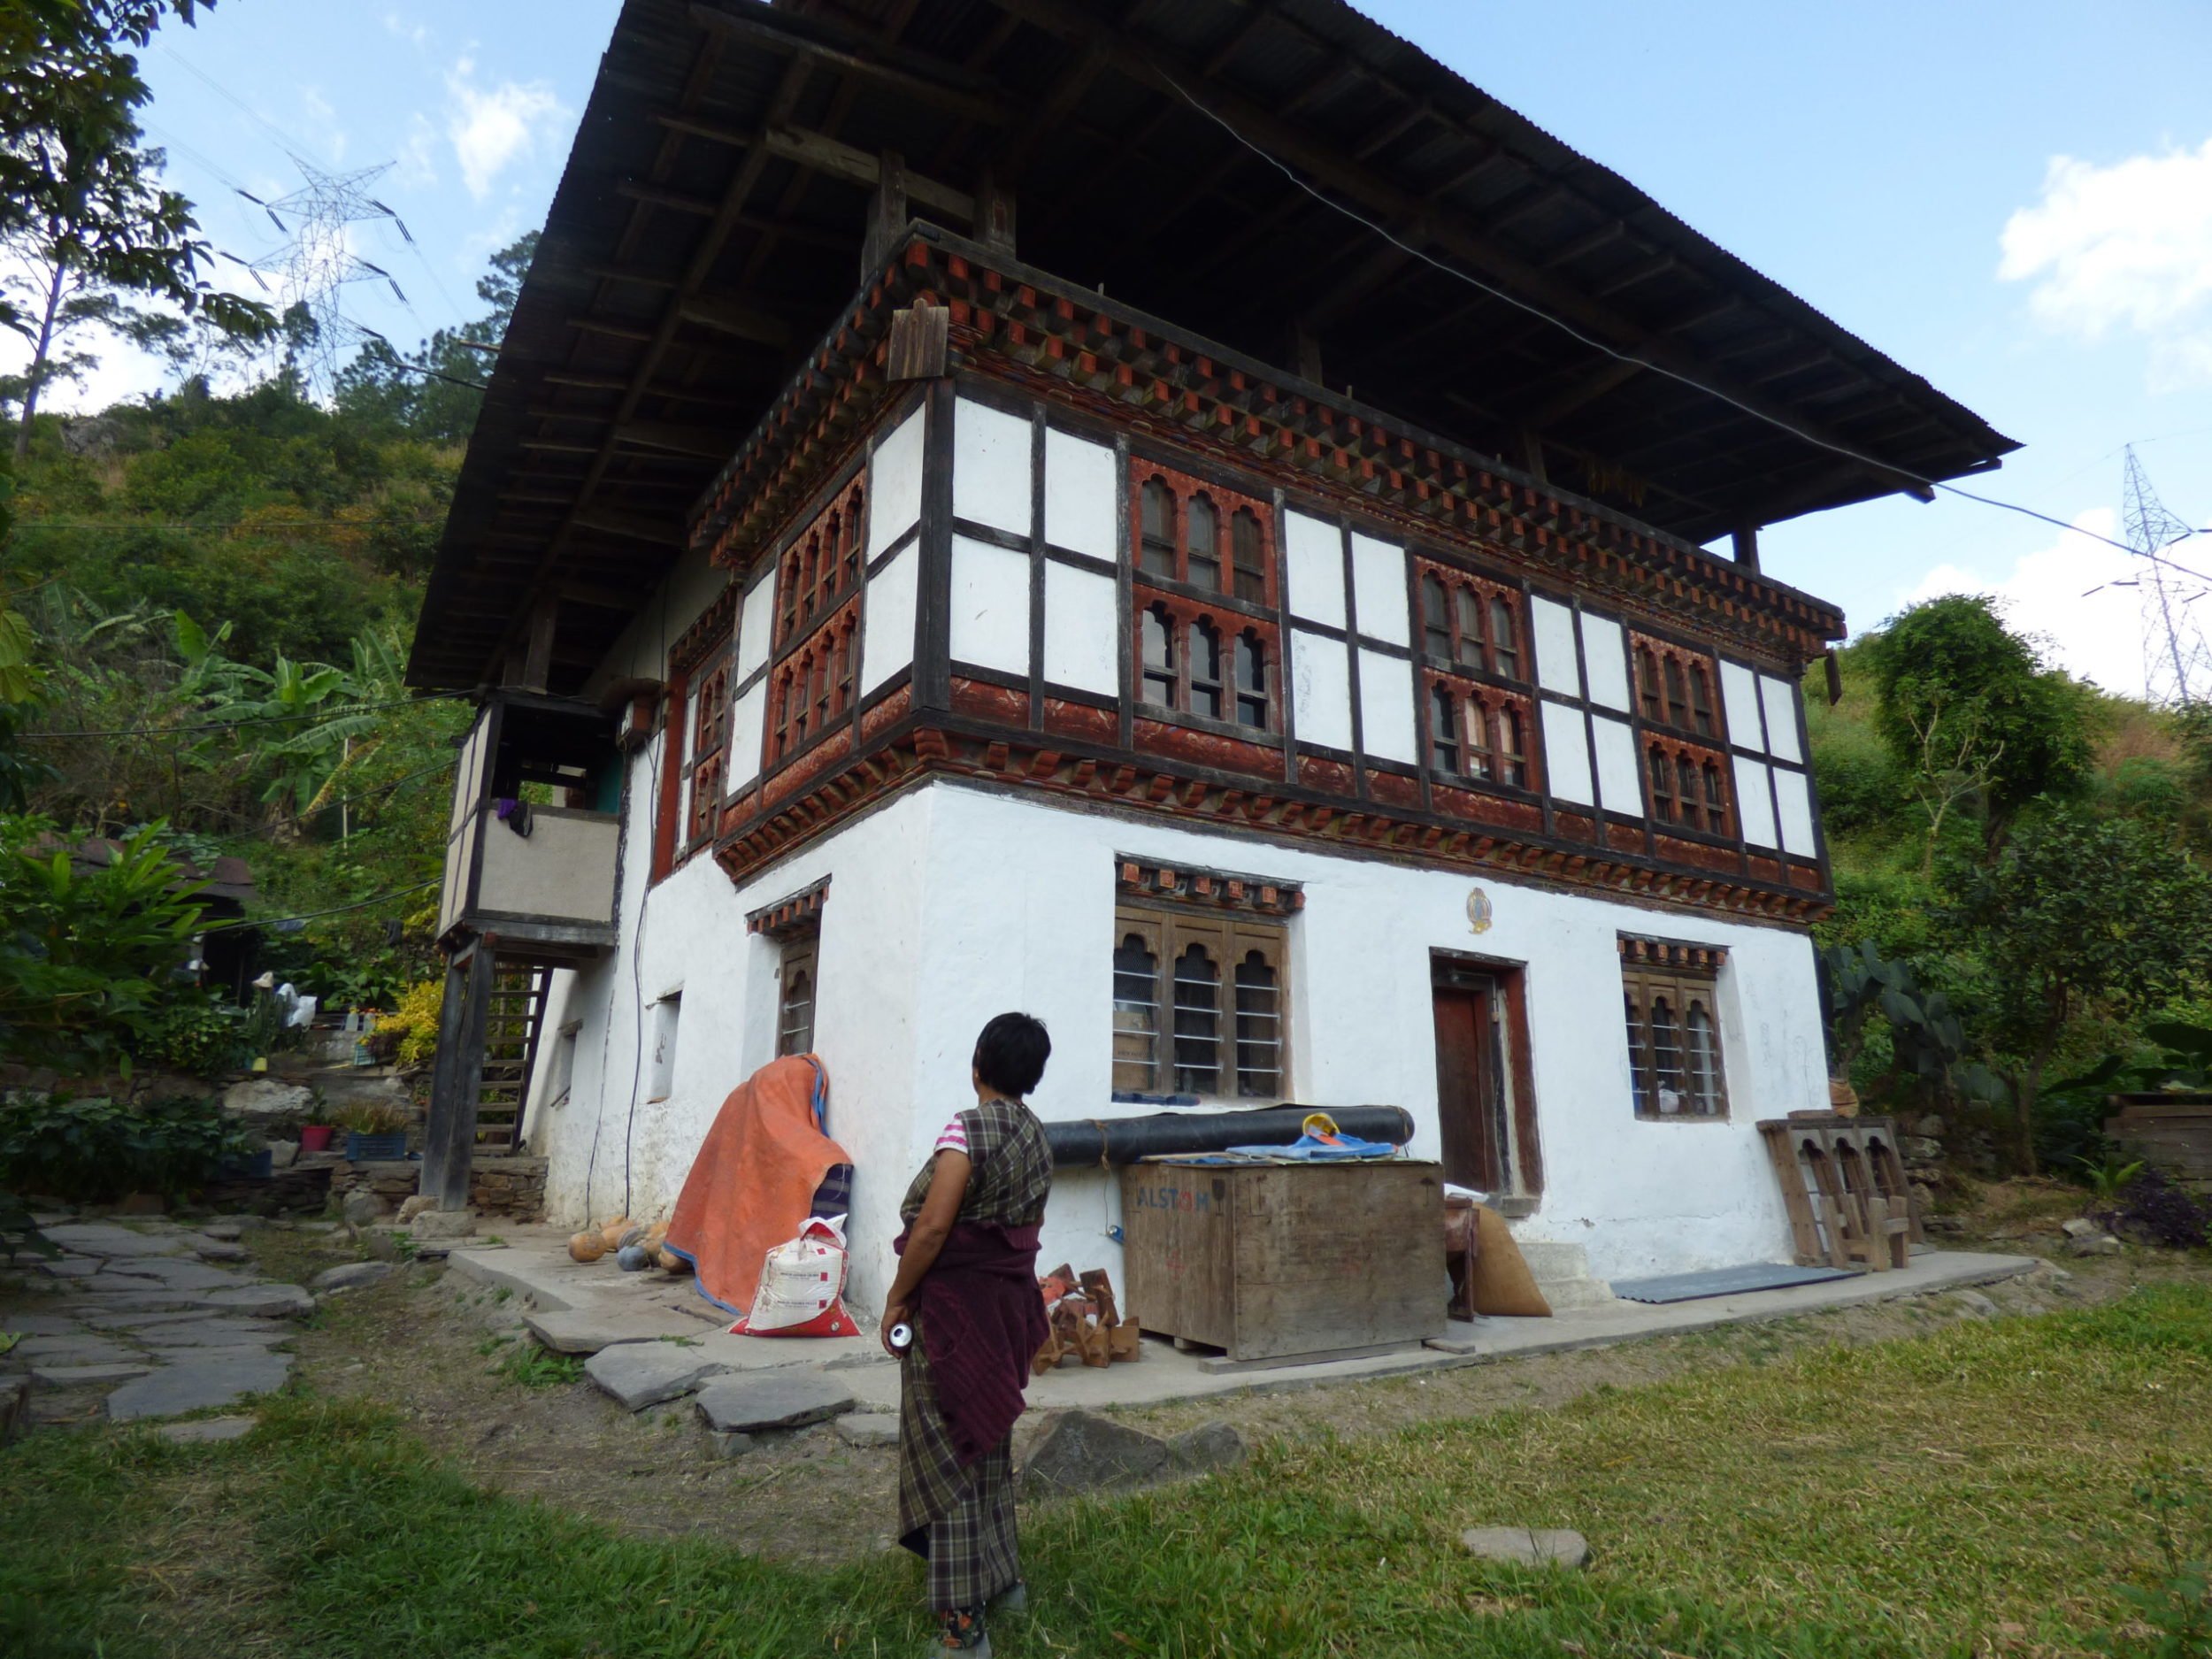 A traditional house repaired and painted after being affected by the blasting at Punatsangchhu hydropower construction site